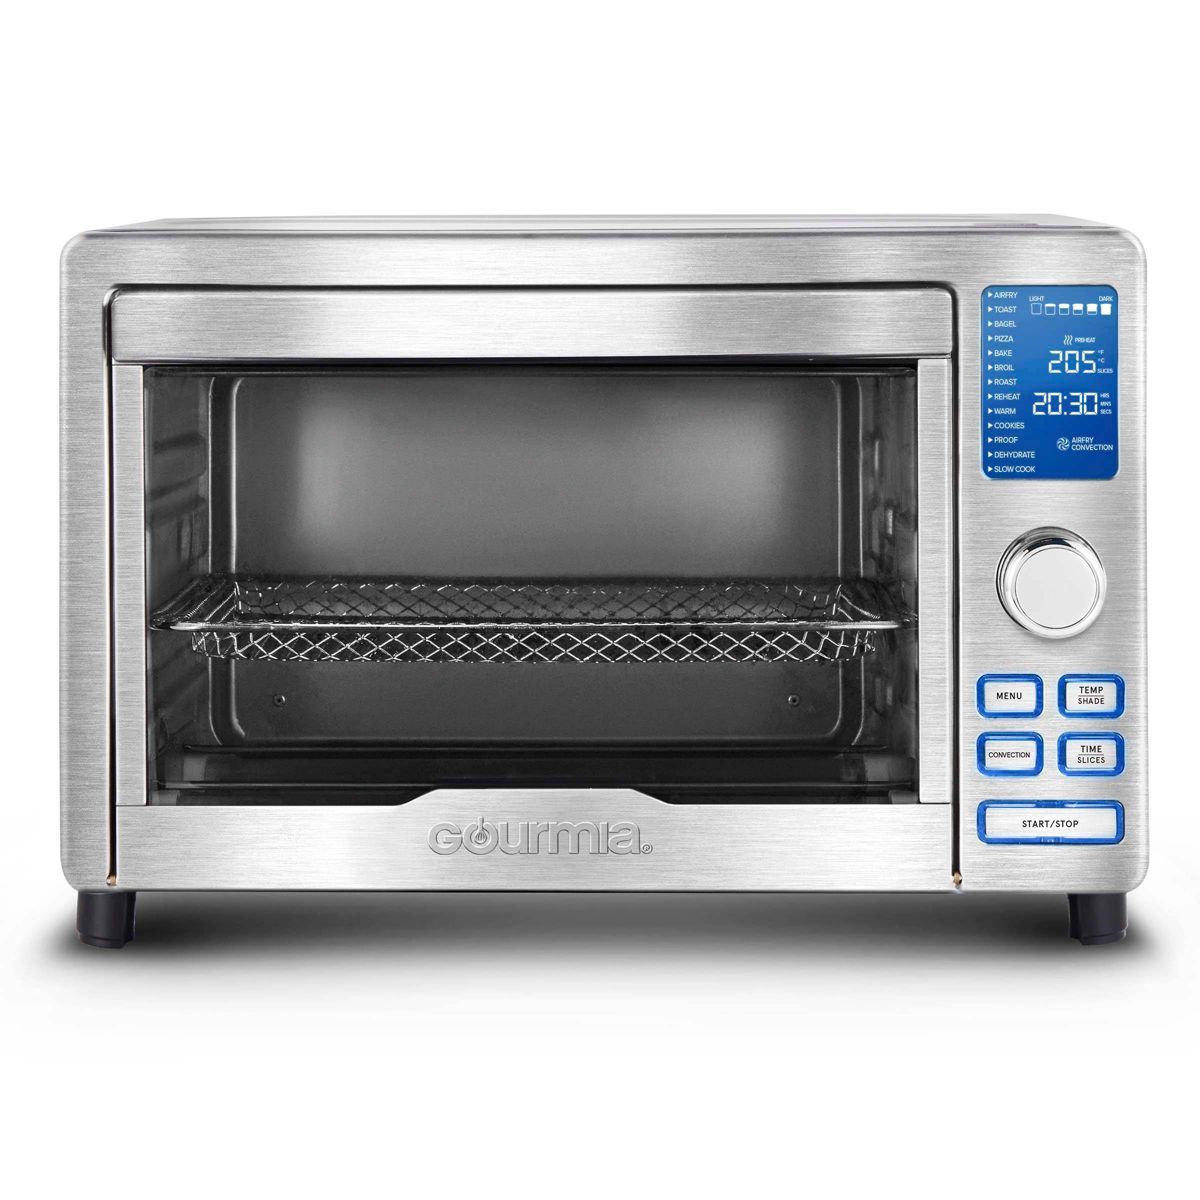 Gourmia Digital Stainless Steel Toaster Oven Air Fryer – Stainless Steel | Target